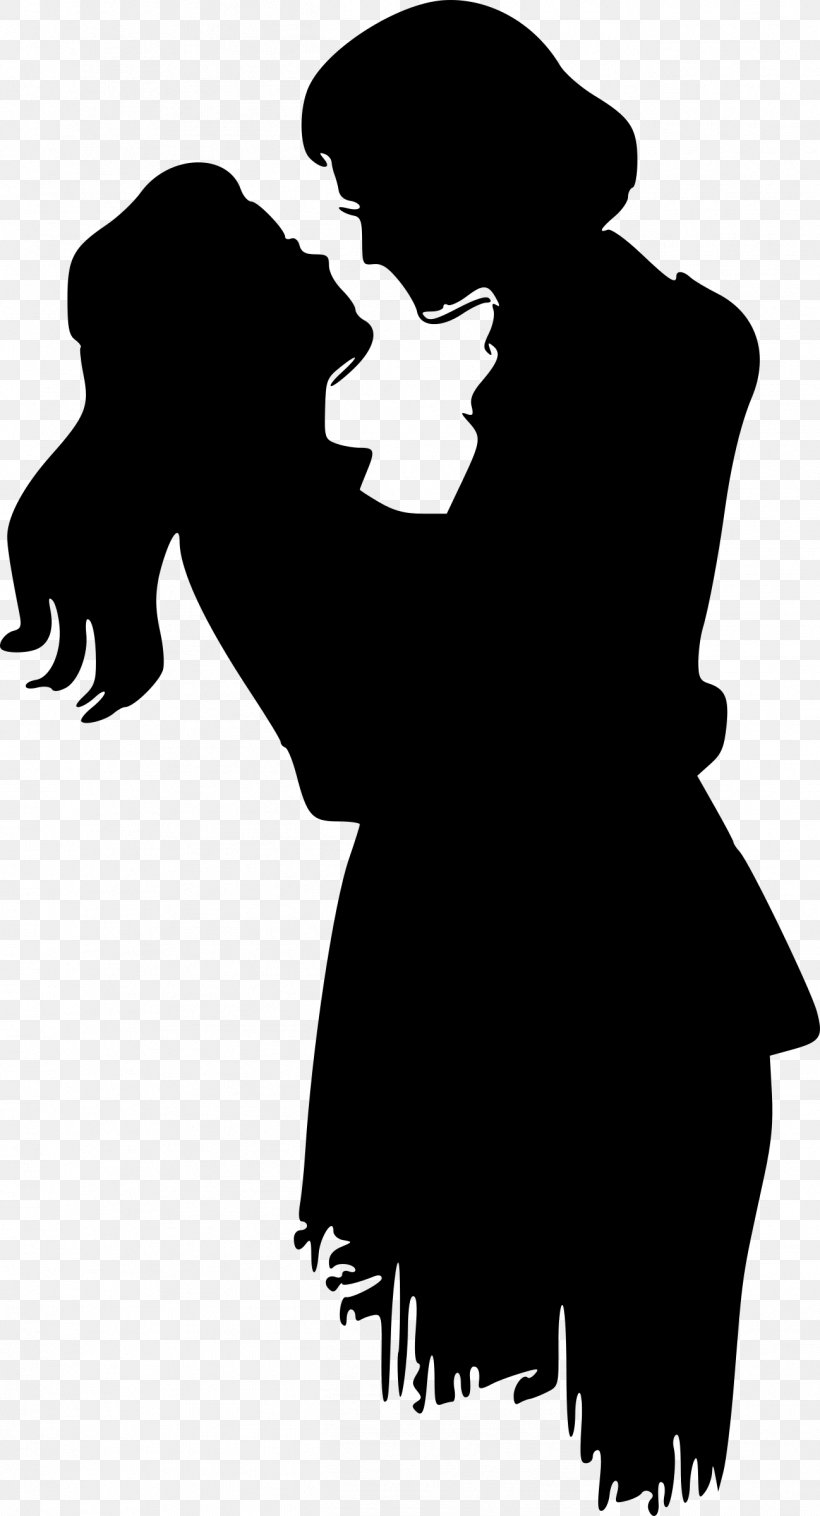 Silhouette Love Clip Art, PNG, 1298x2400px, Silhouette, Art, Black, Black And White, Couple Download Free